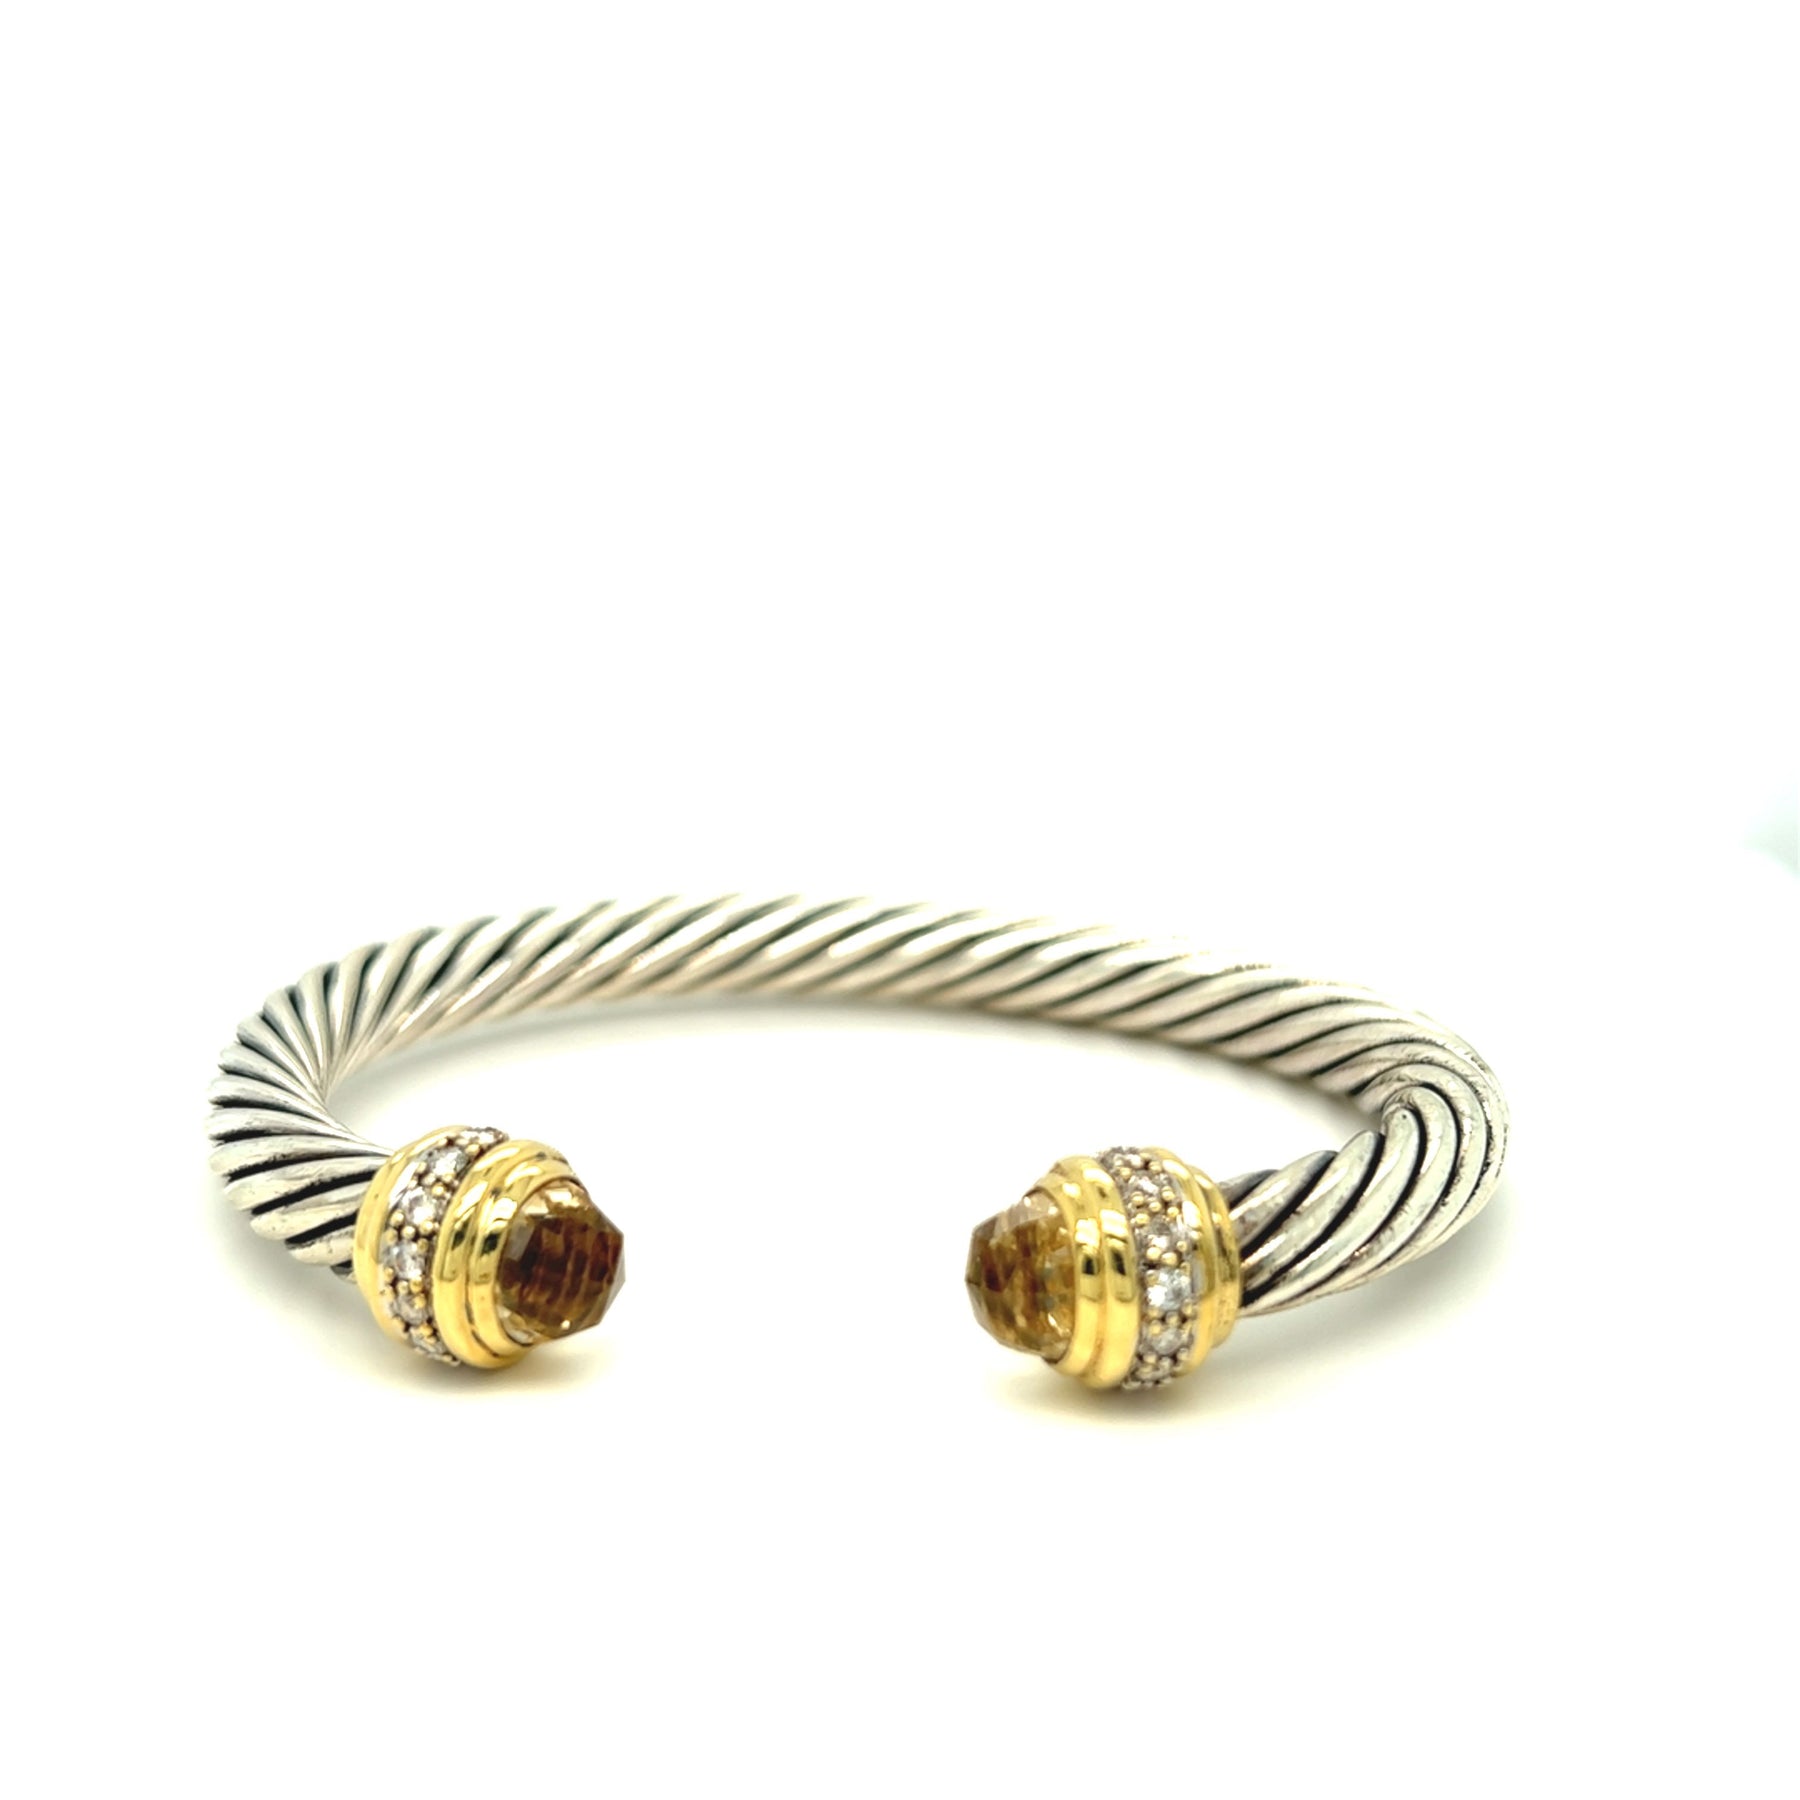 David Yurman Are Cable Silver and Citrine Gems Cuff Bangle Forever Bracelet Diamond – and